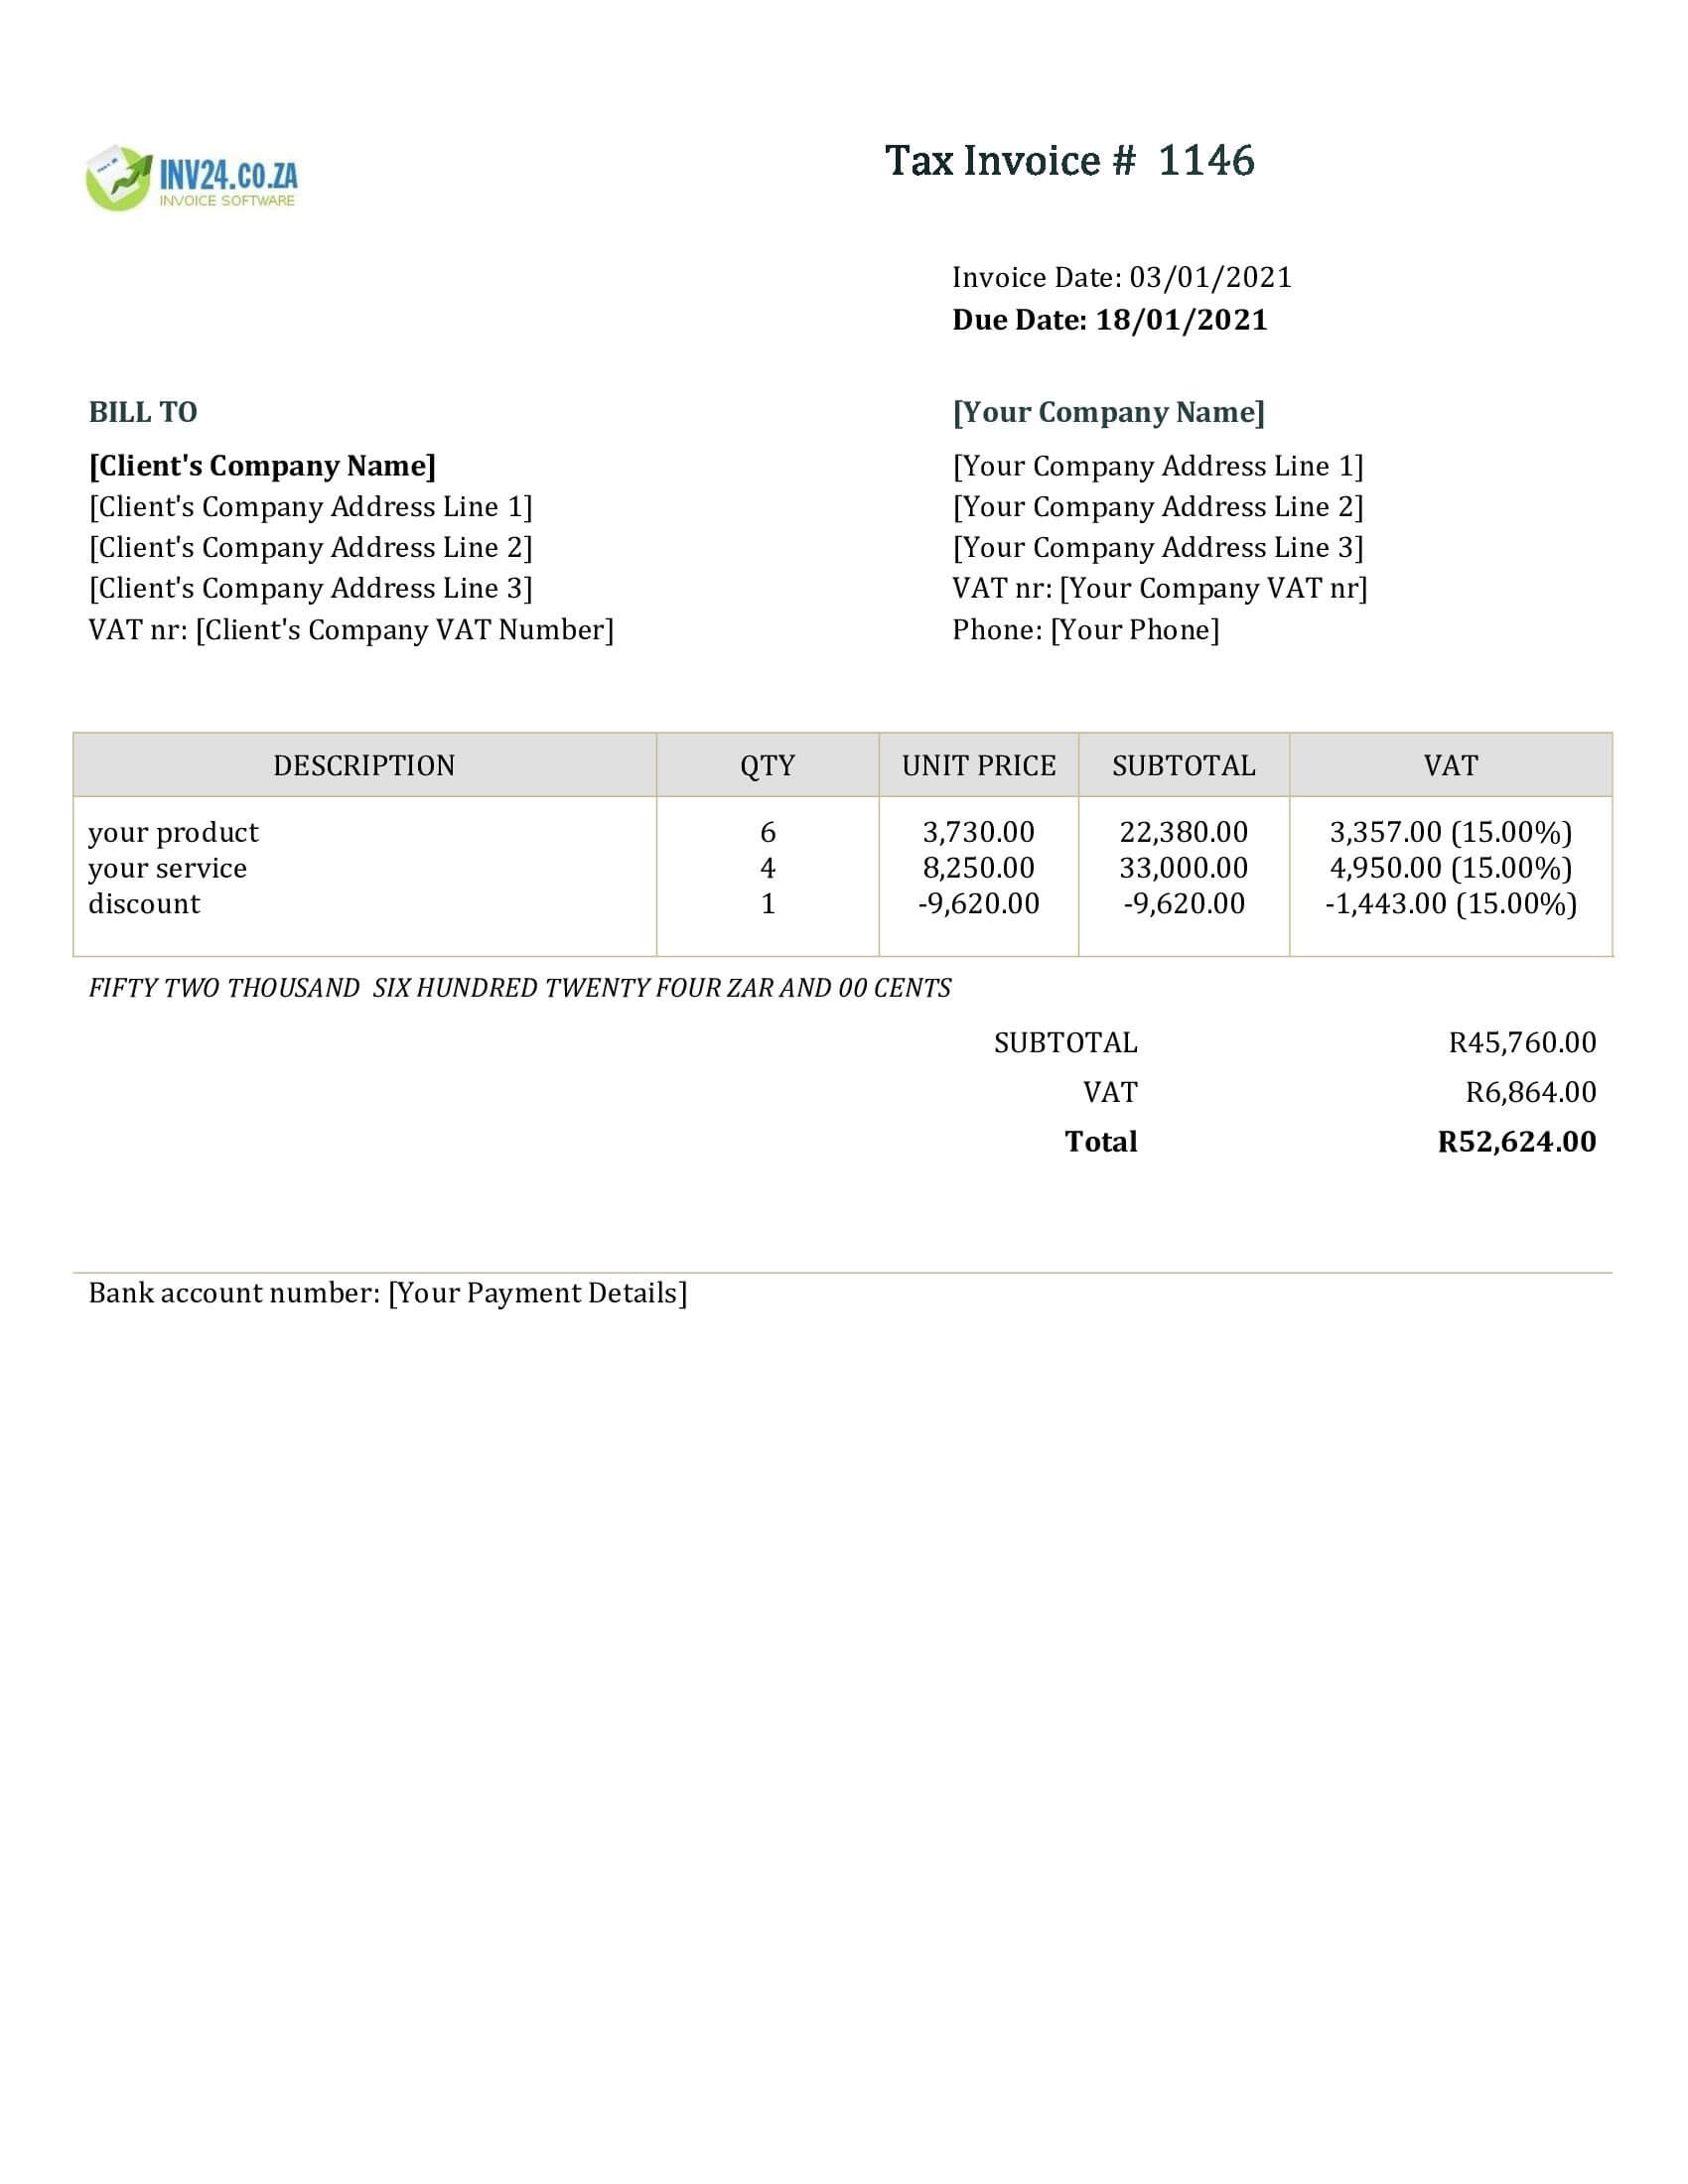 Word invoice example South Africa